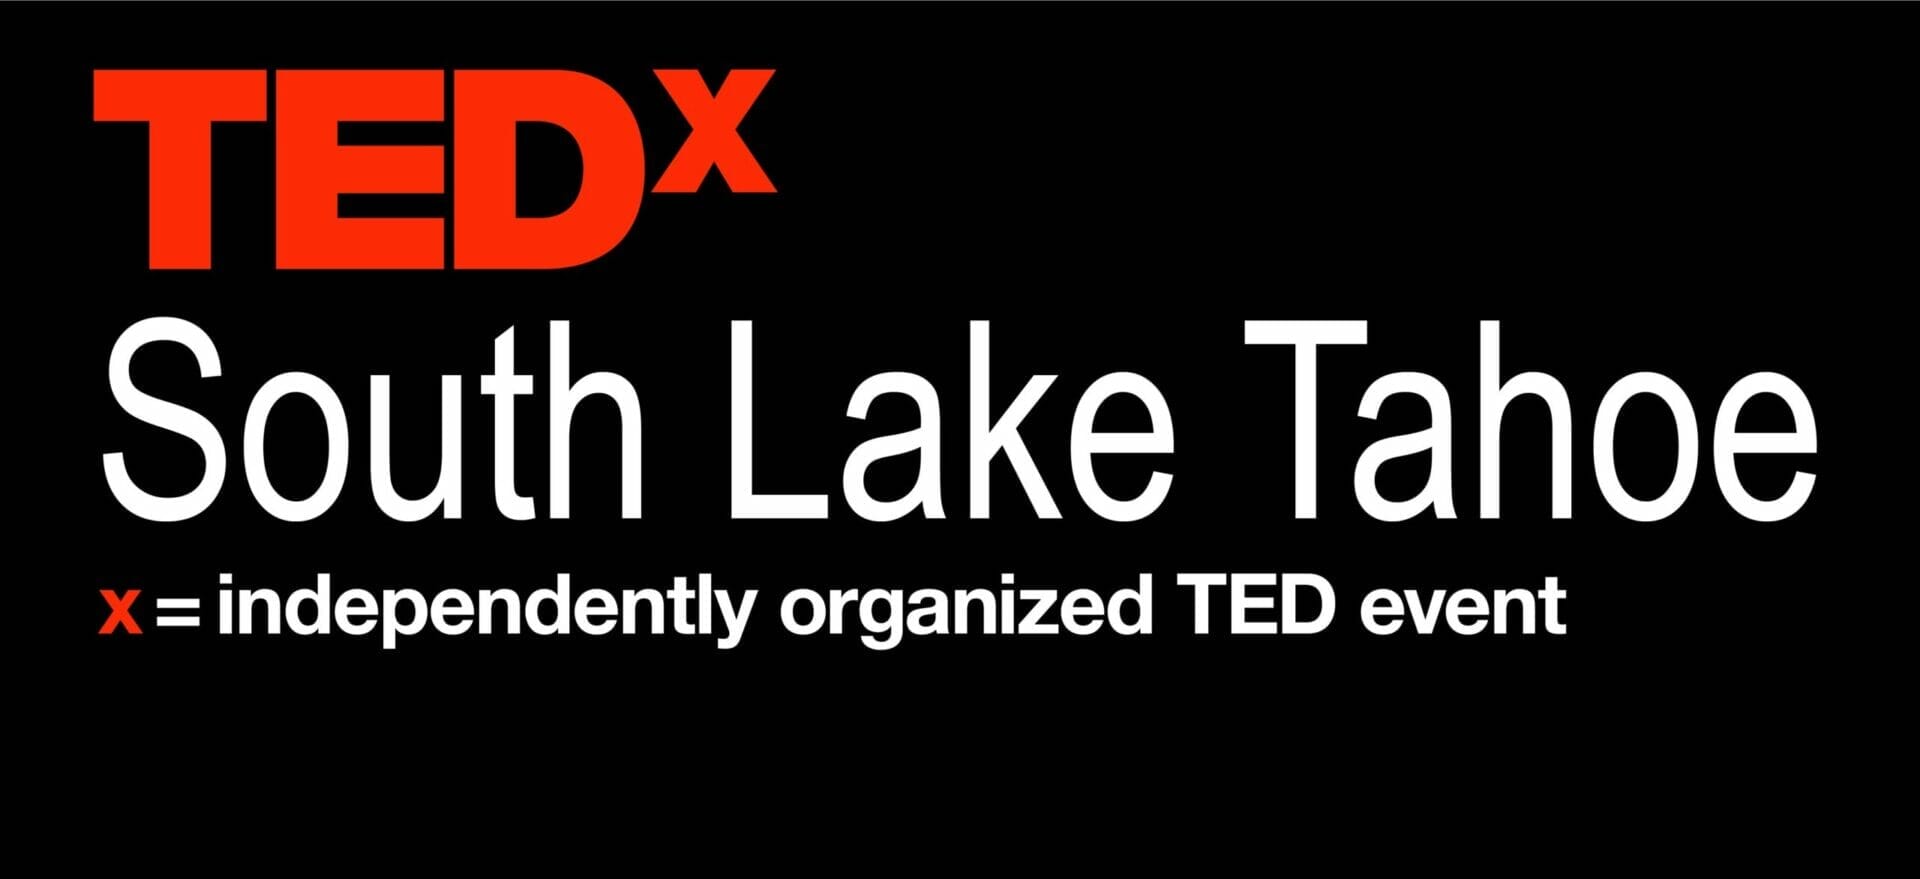 tedx south lake tahoe independently organized ted event logo